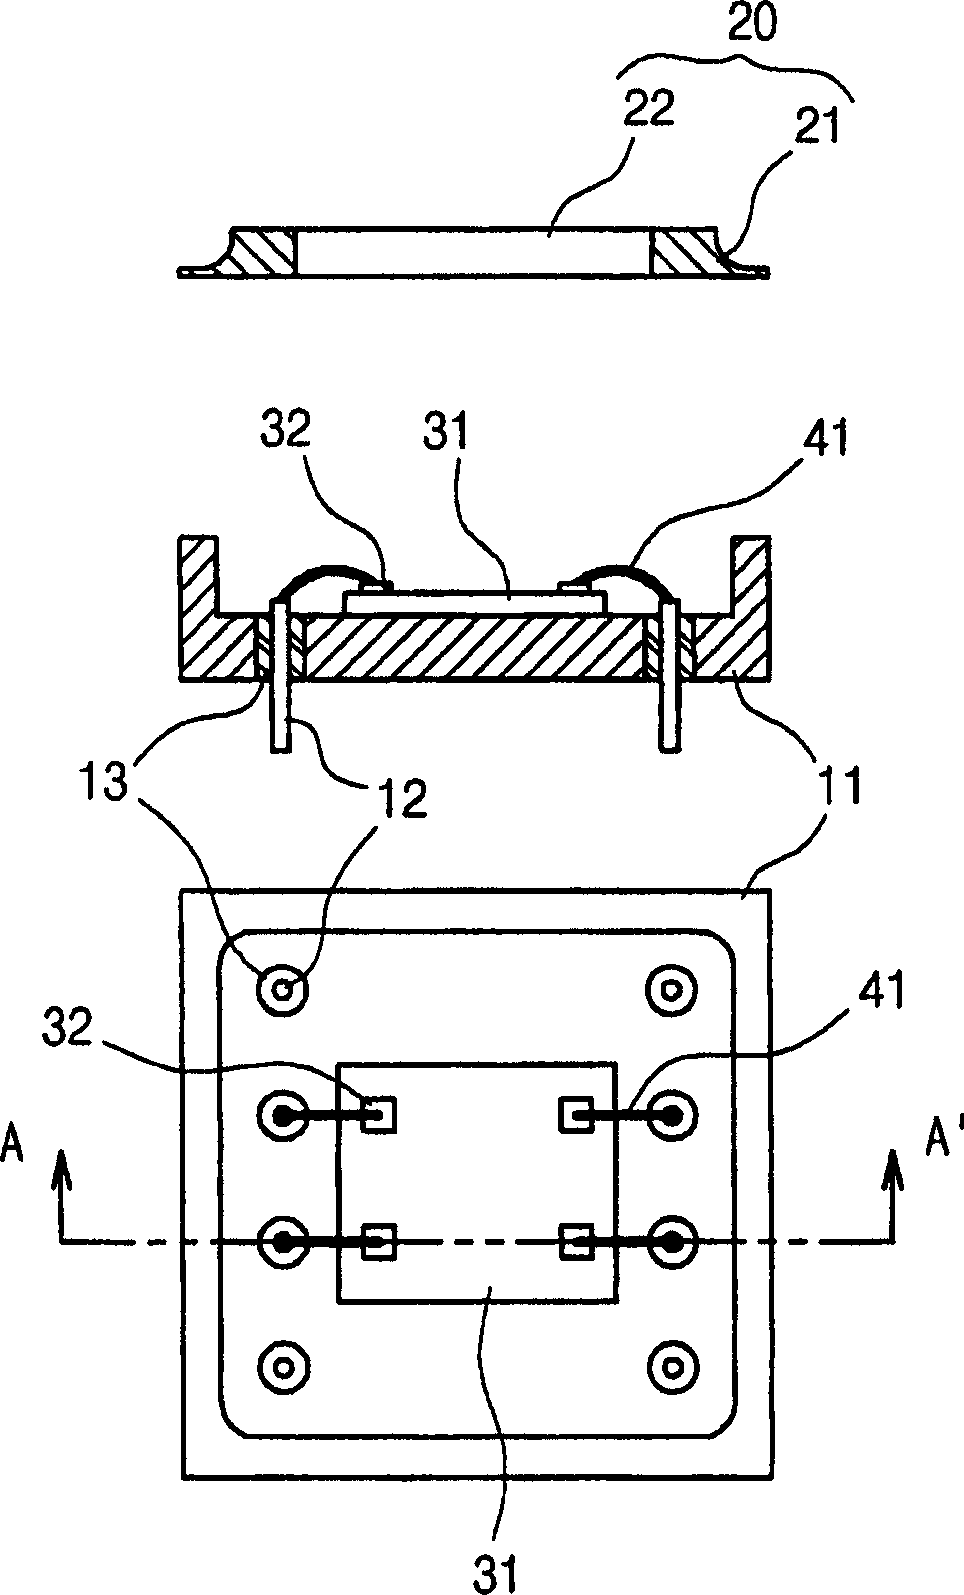 Scanning micro-mirror package, method for fabricating the same, and optical scanning device employing the same